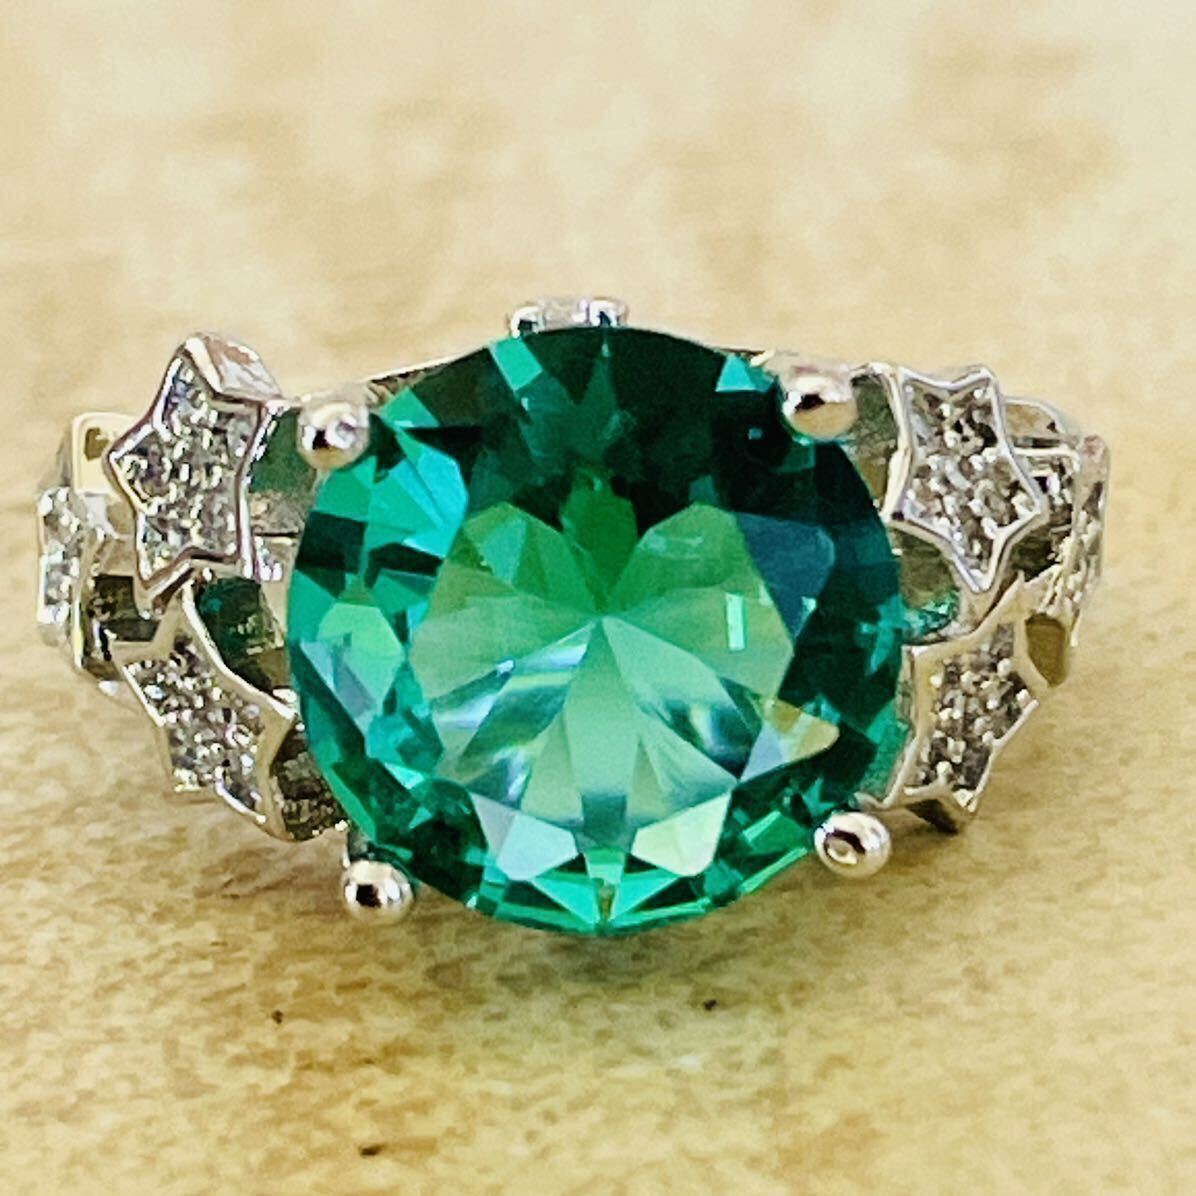 * anonymity delivery * free shipping * emerald? Showa era ring Vintage ring 13.5 number 